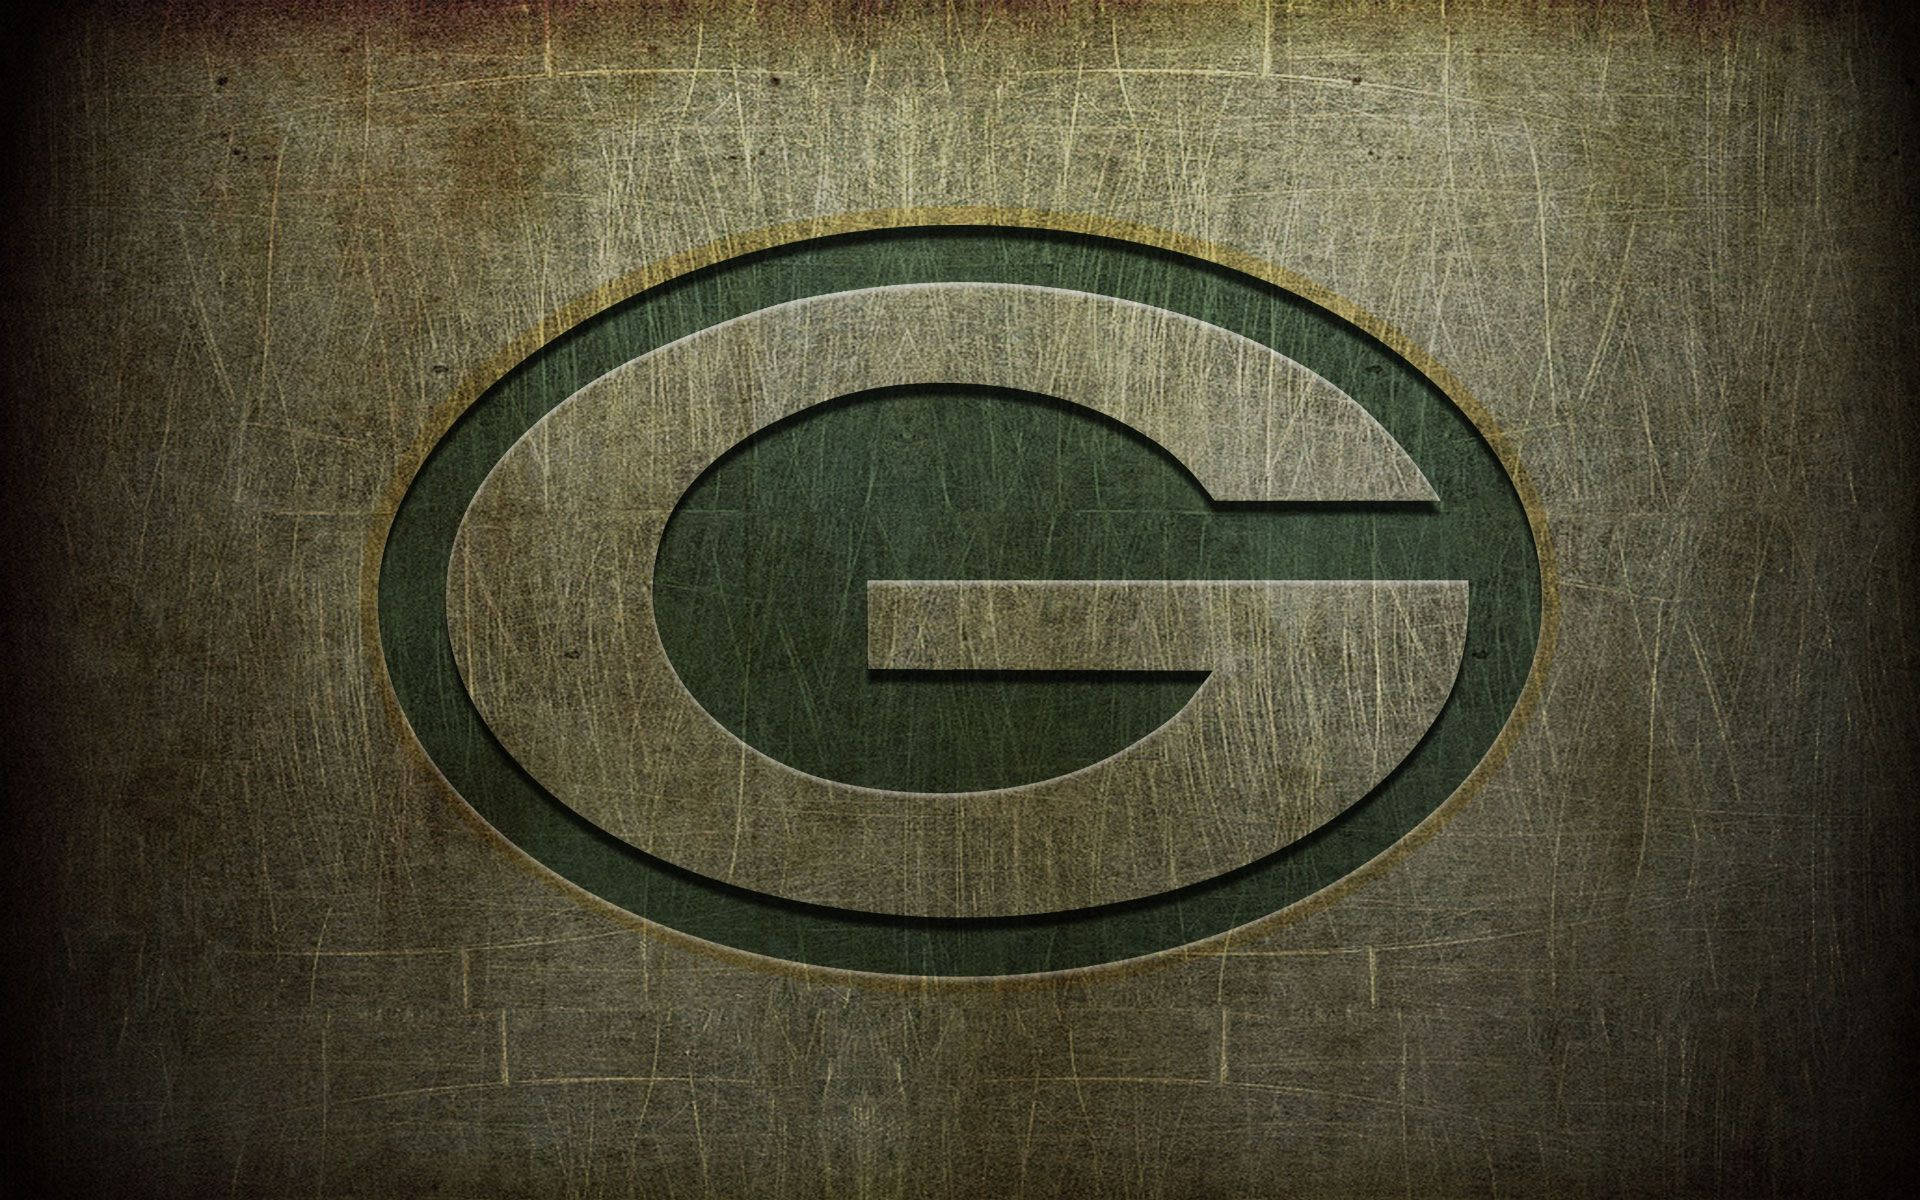 1920X1200 Green Bay Packers Wallpaper and Background